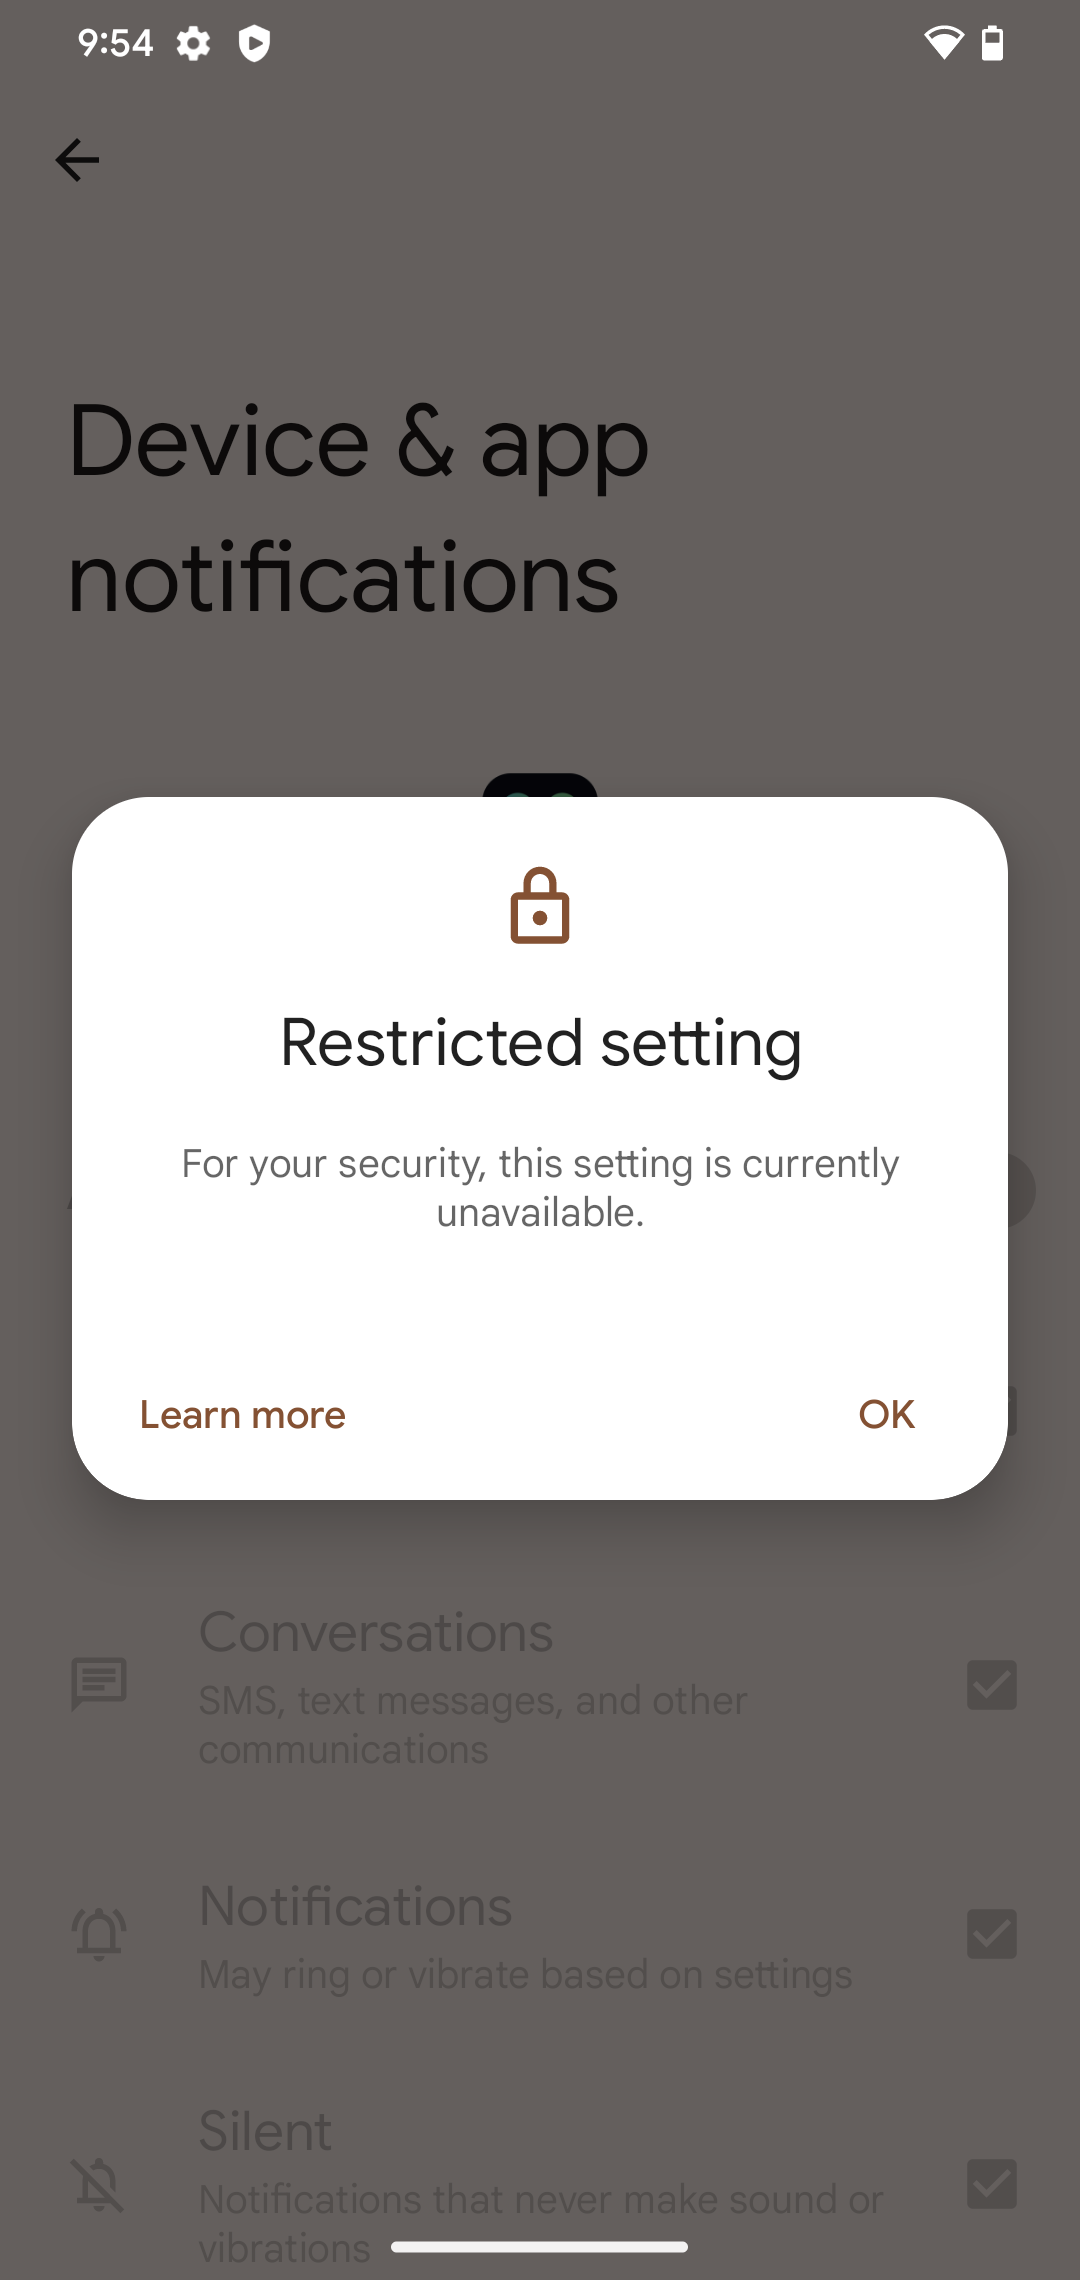 Restricted setting pop-up